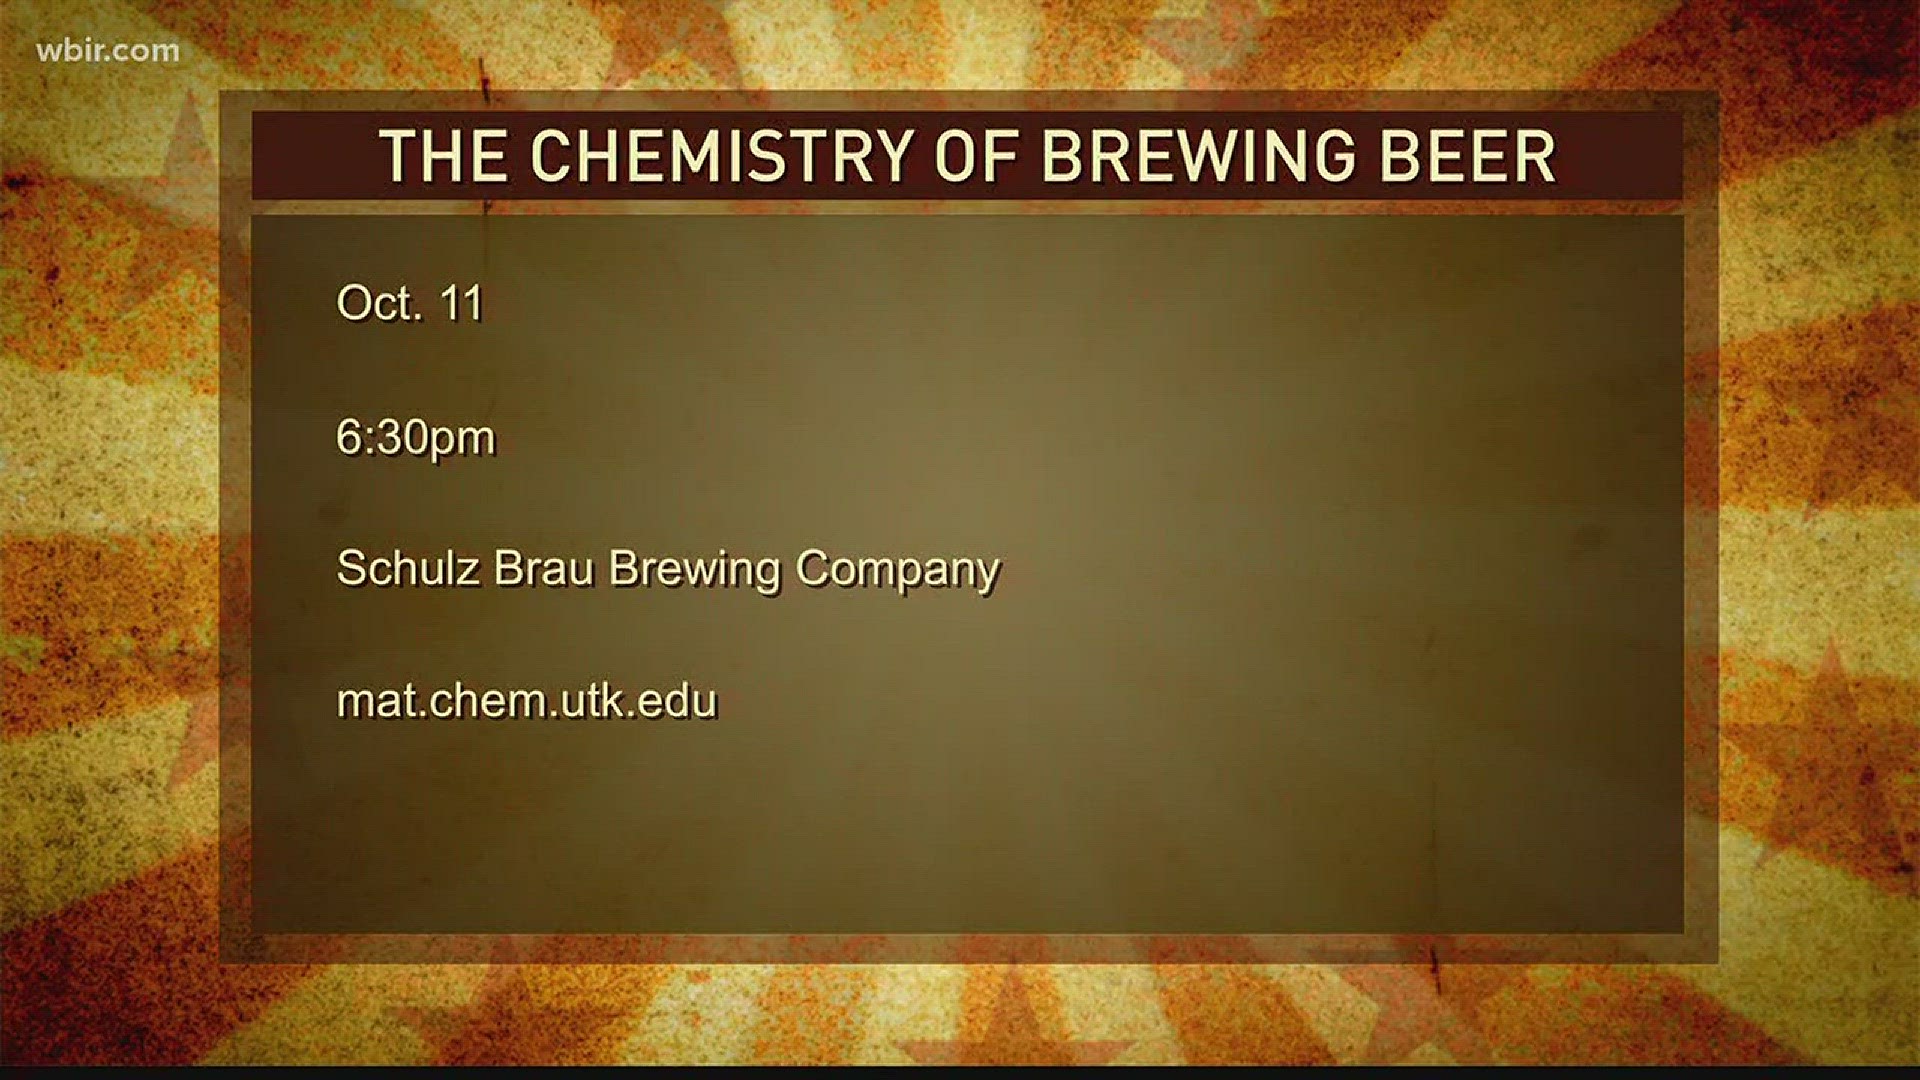 The American Chemical Society will host a Science Cafe at Schulz Brau Brewing on Oct. 11, at 6:30pm.Oct. 9, 2017-4pm